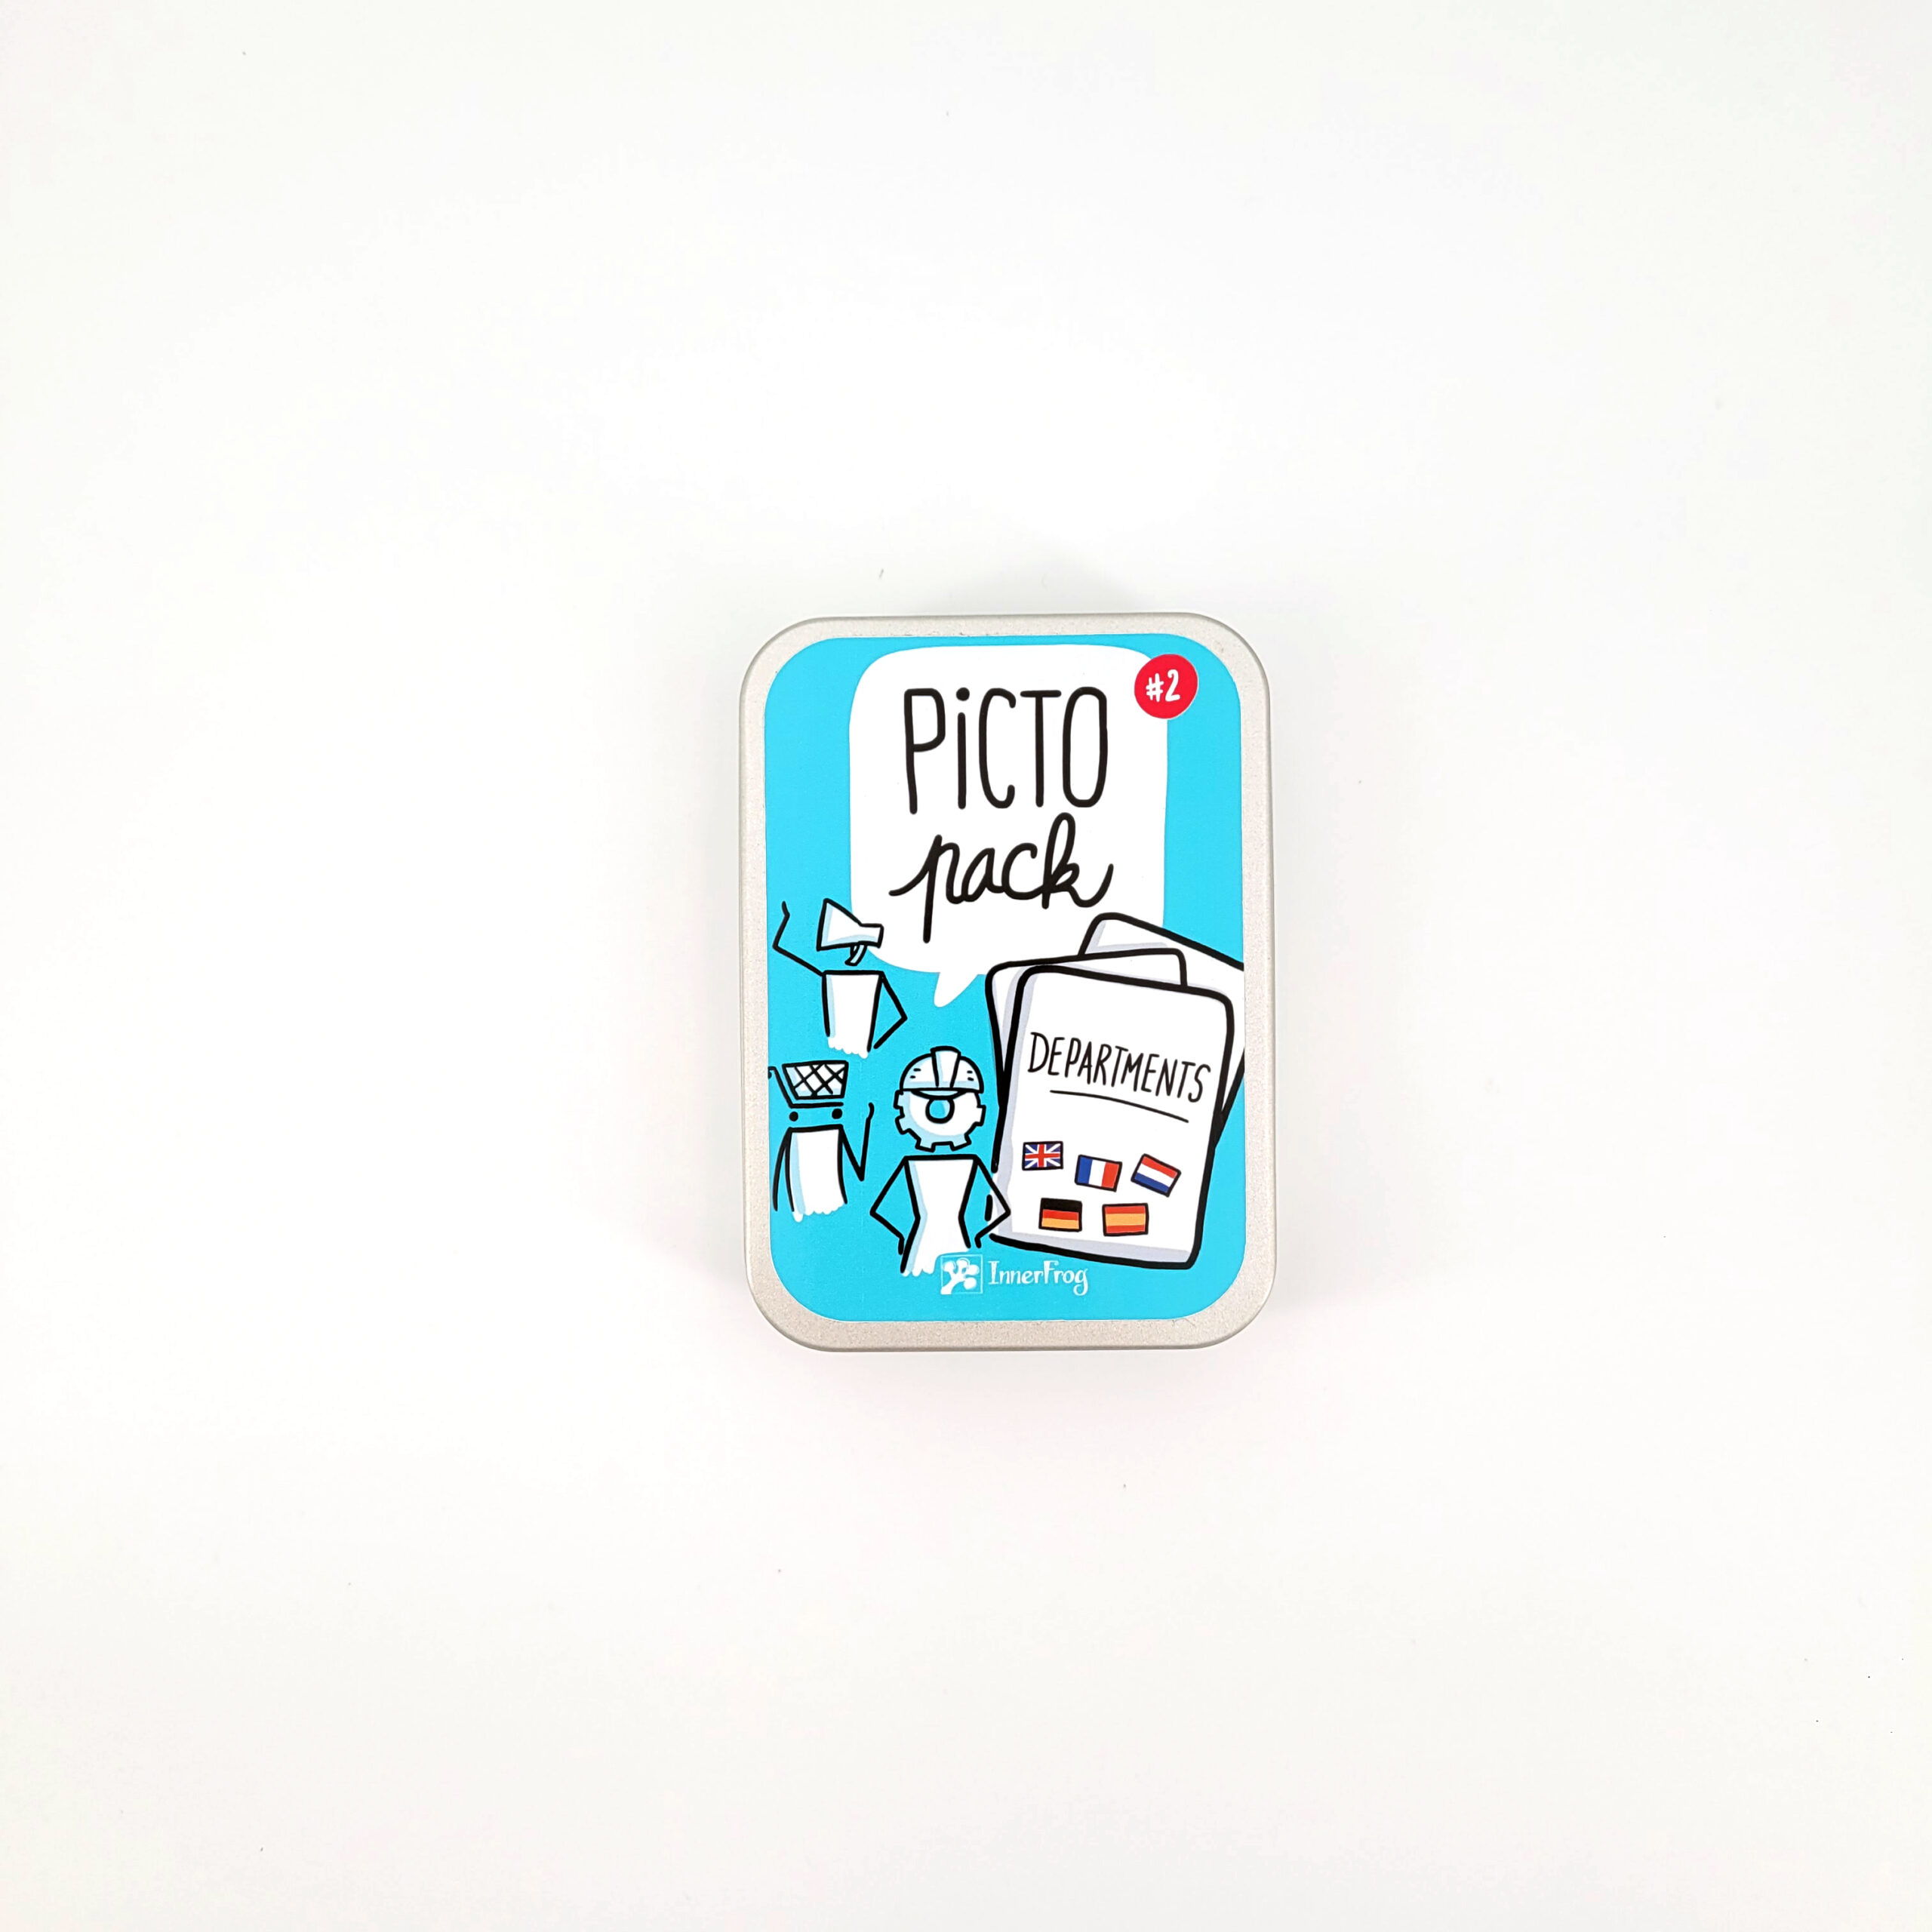 Picto Pack 2 - Departments 8